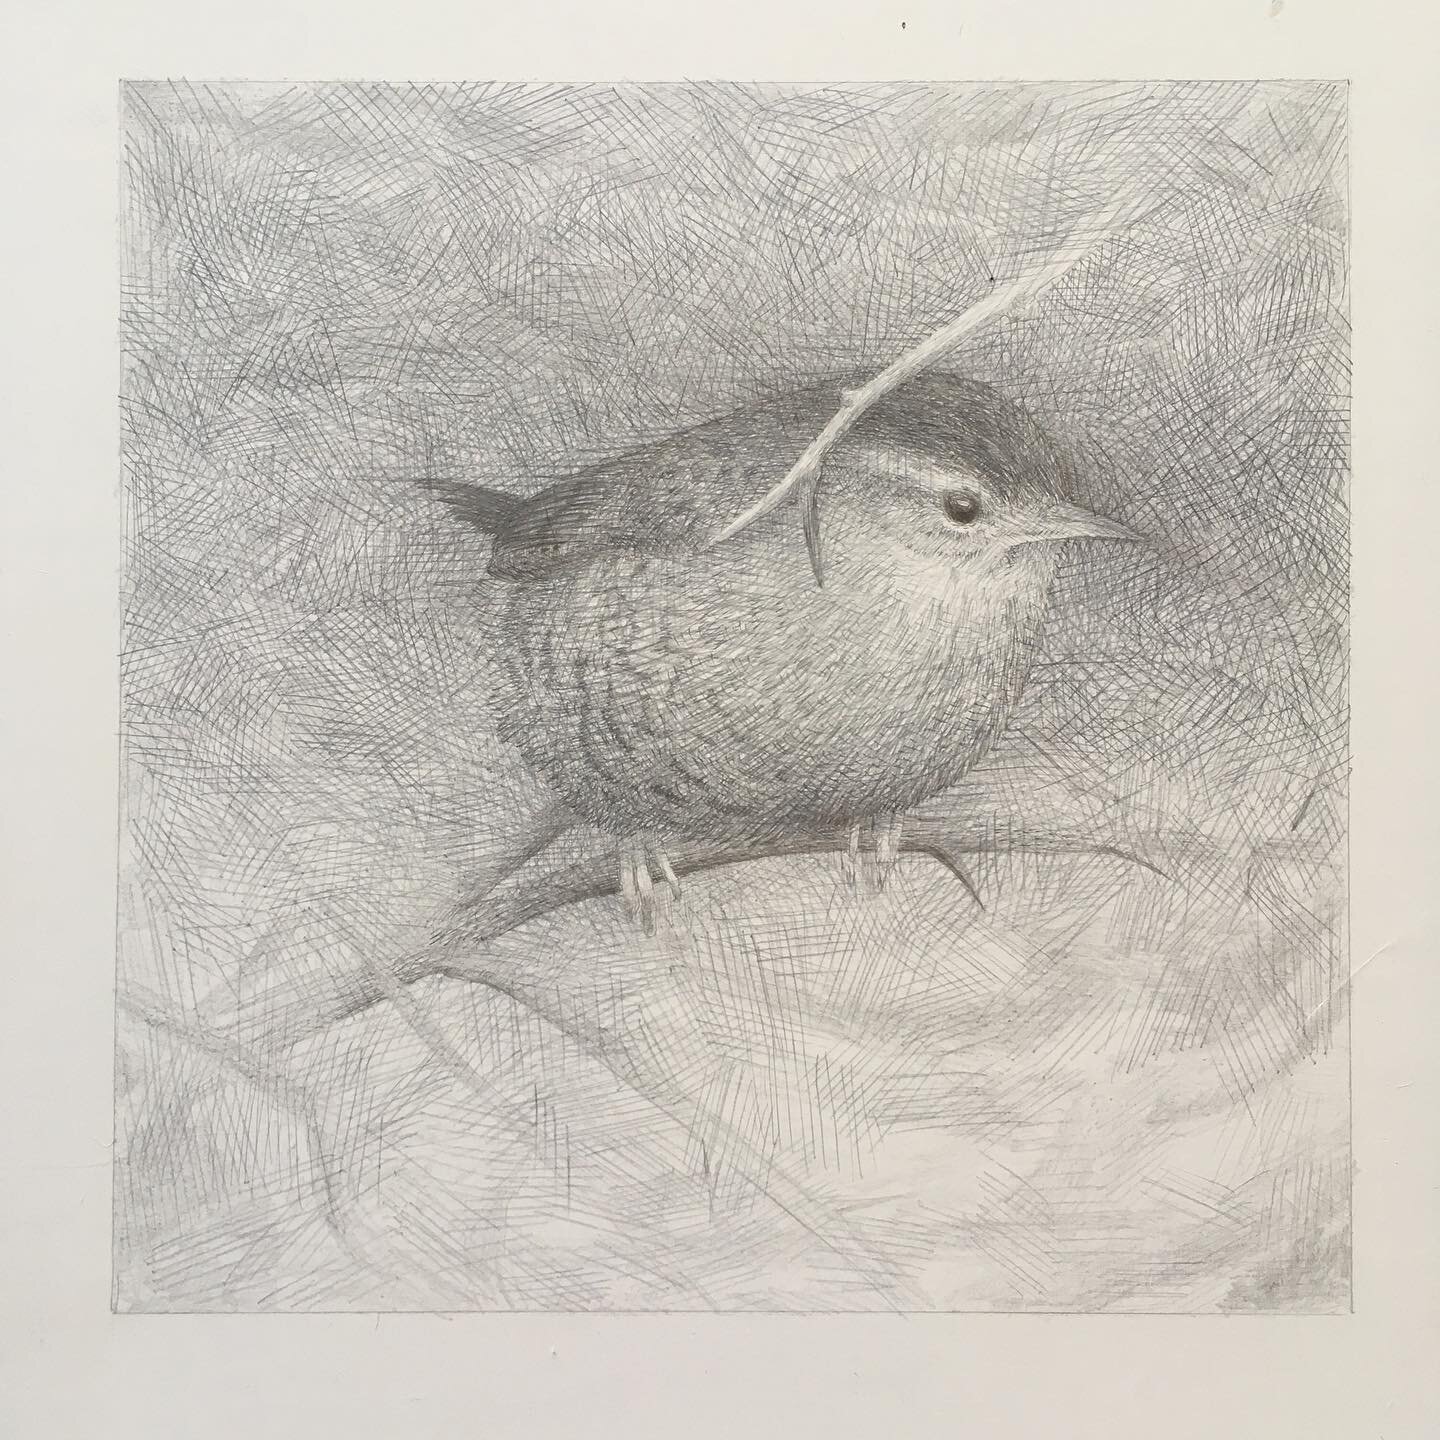 Wren. Silverpoint. 
Started this months ago and dug it out today to rework. It might even be finished. 
BTW all the originals look better in real life. Silverpoint aren&rsquo;t photogenic. 
#wren #silverpointdrawing